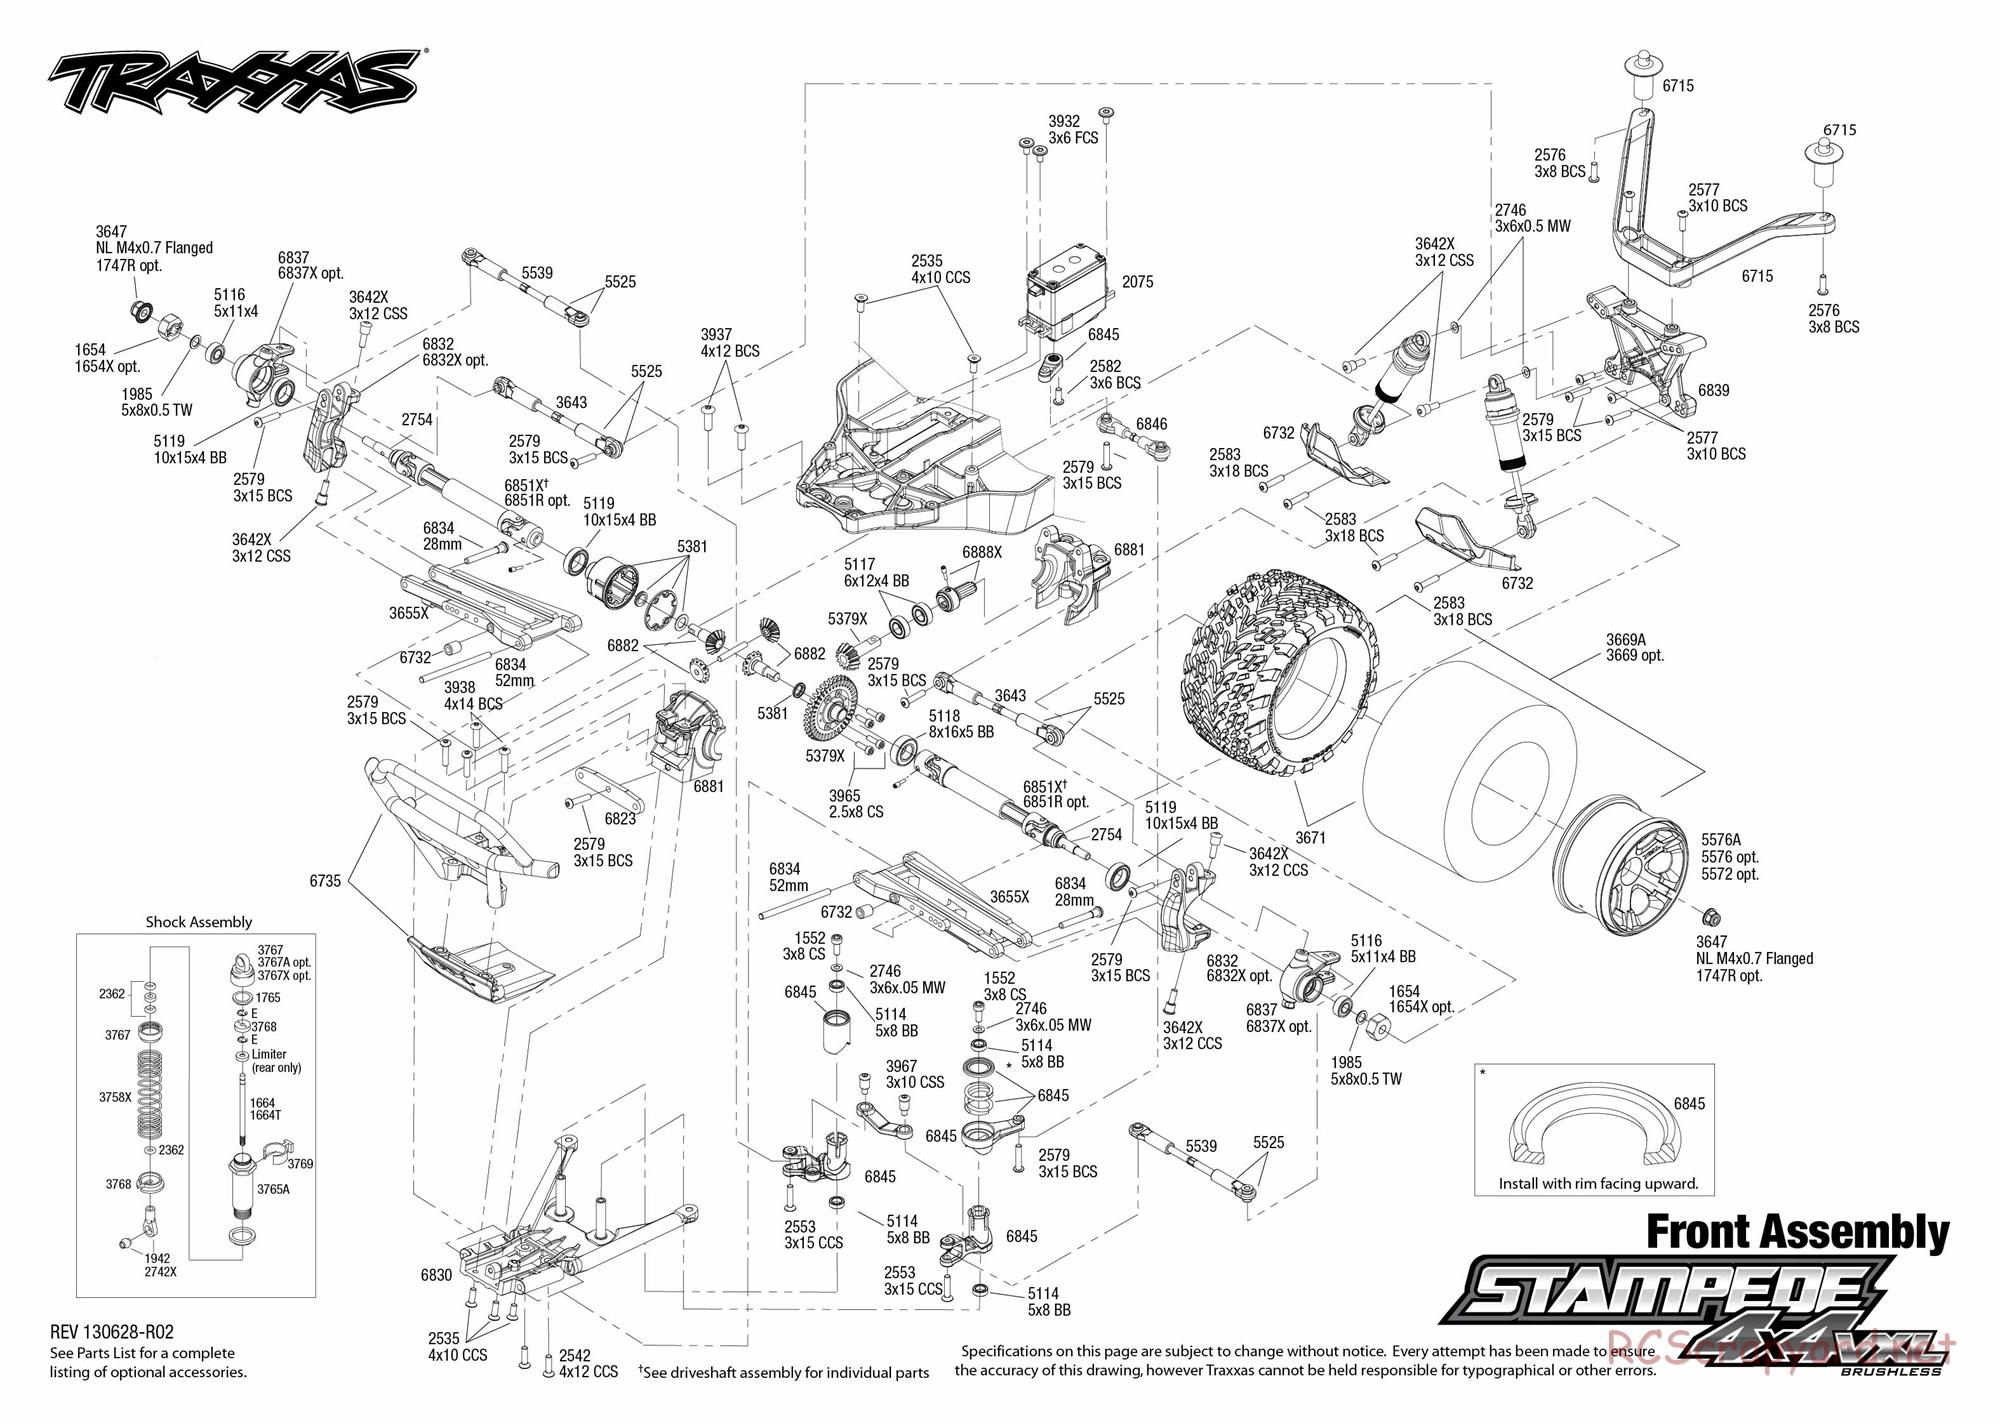 Traxxas - Stampede 4x4 VXL (2012) - Exploded Views - Page 3